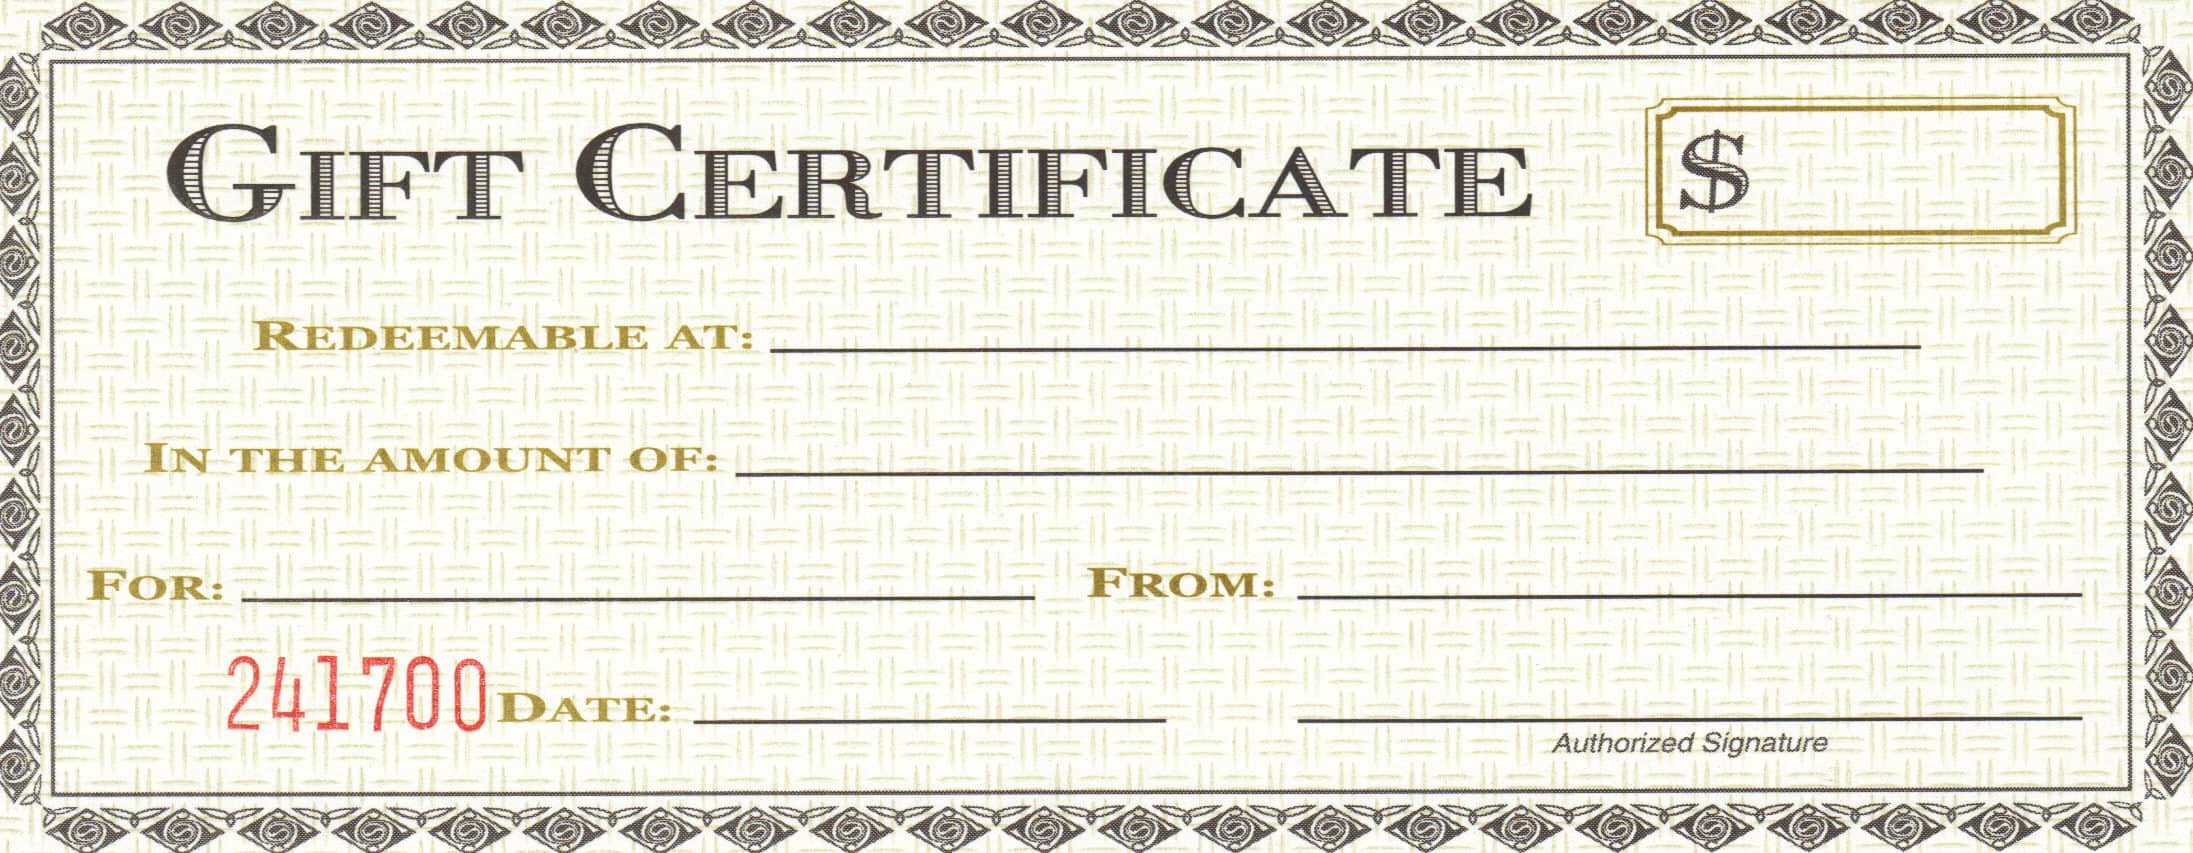 Gift Certificate Template Pages 18 Gift Certificate Templates Excel Pdf formats